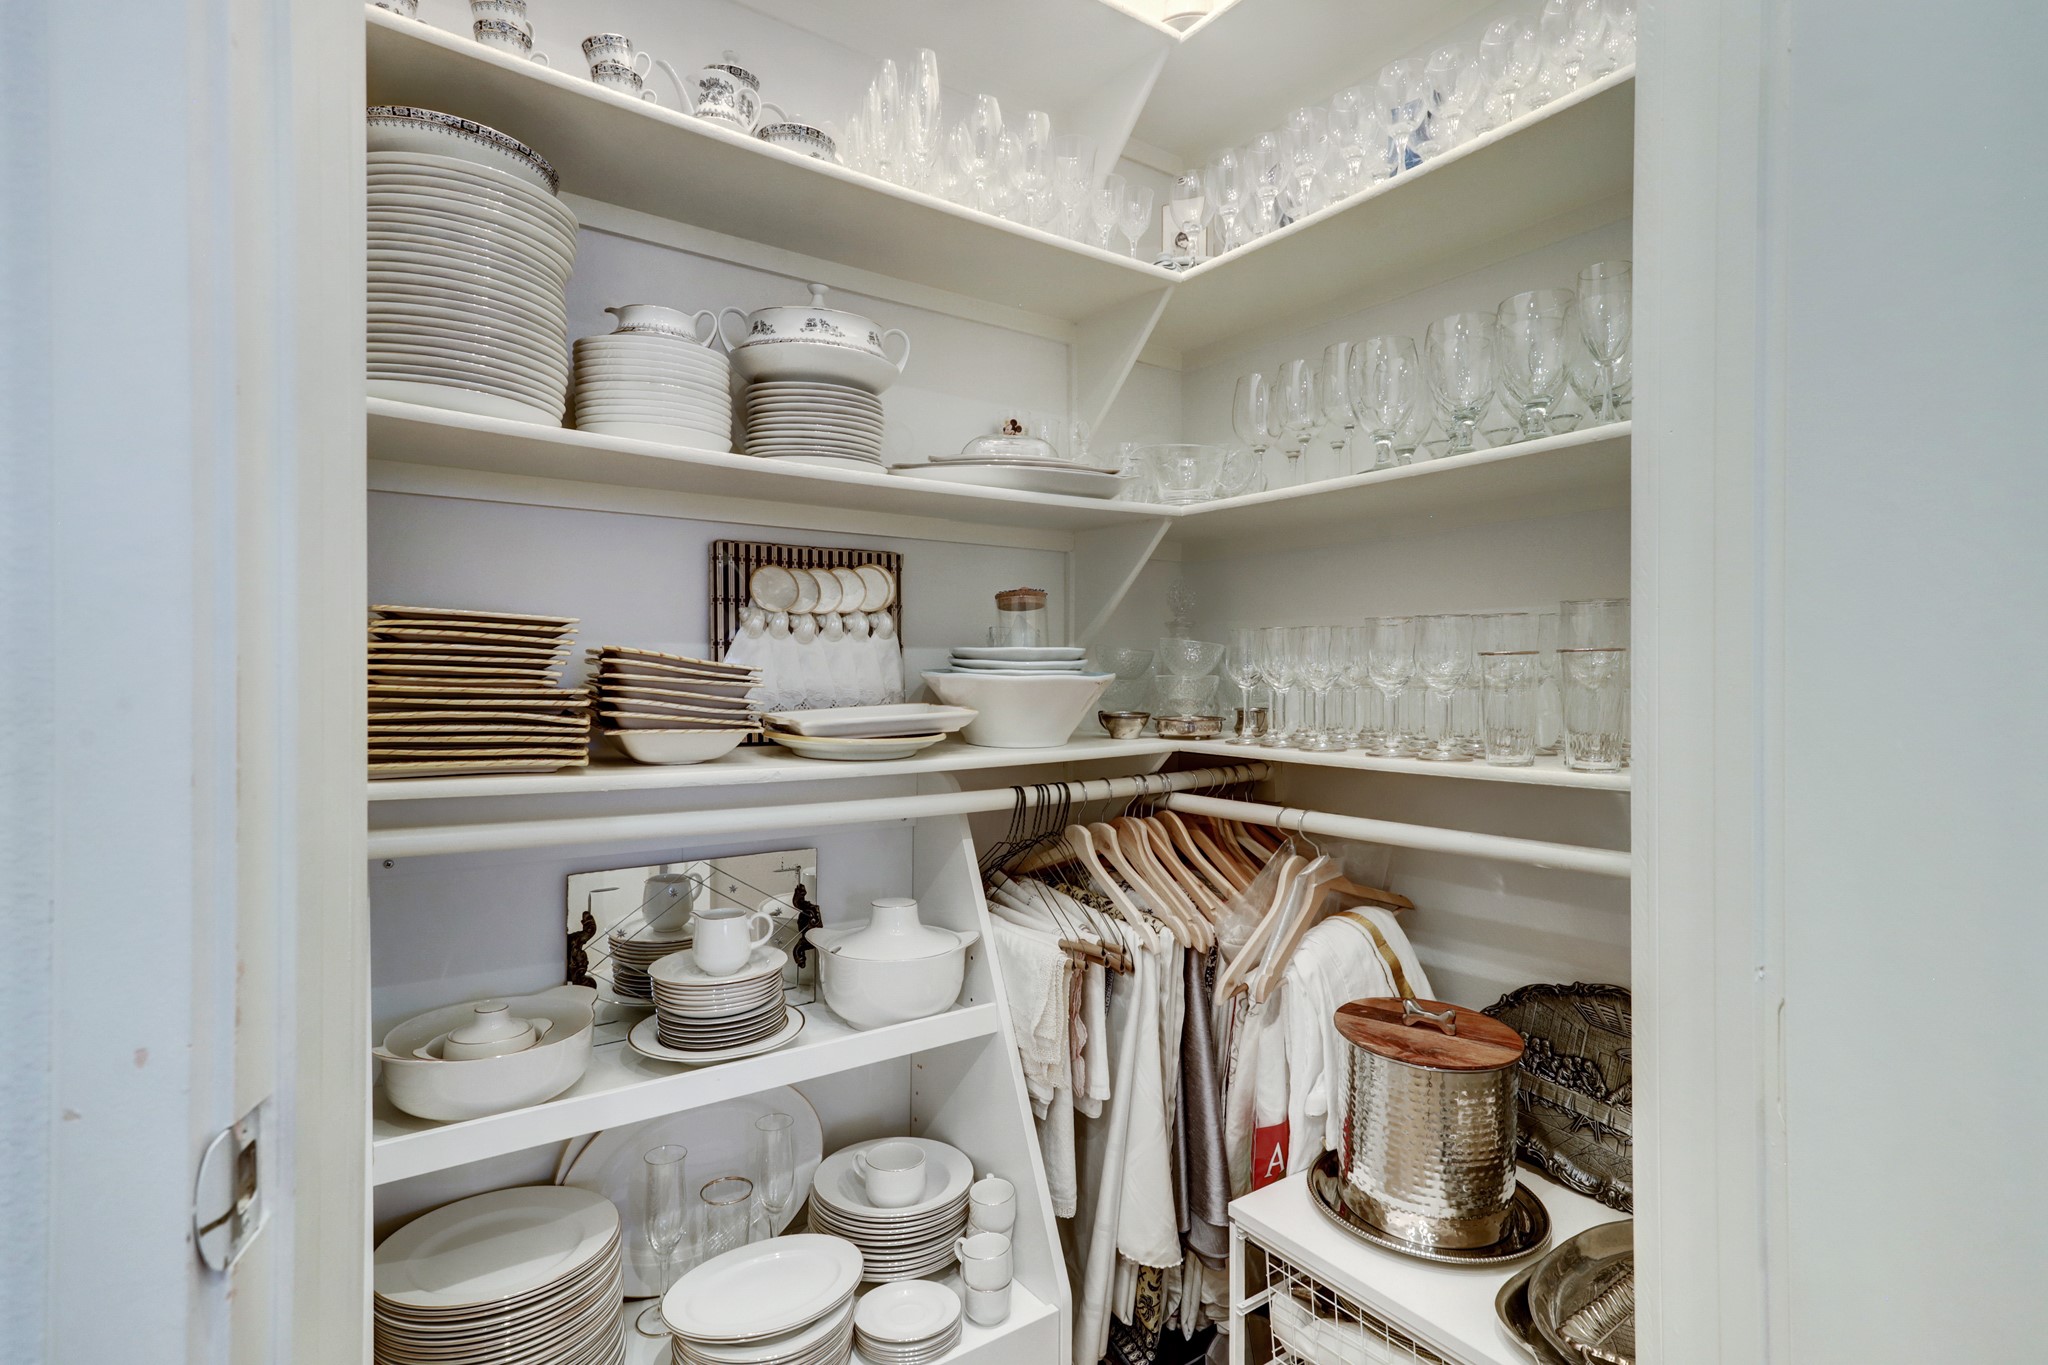 Oversized storage pantry in the kitchen.